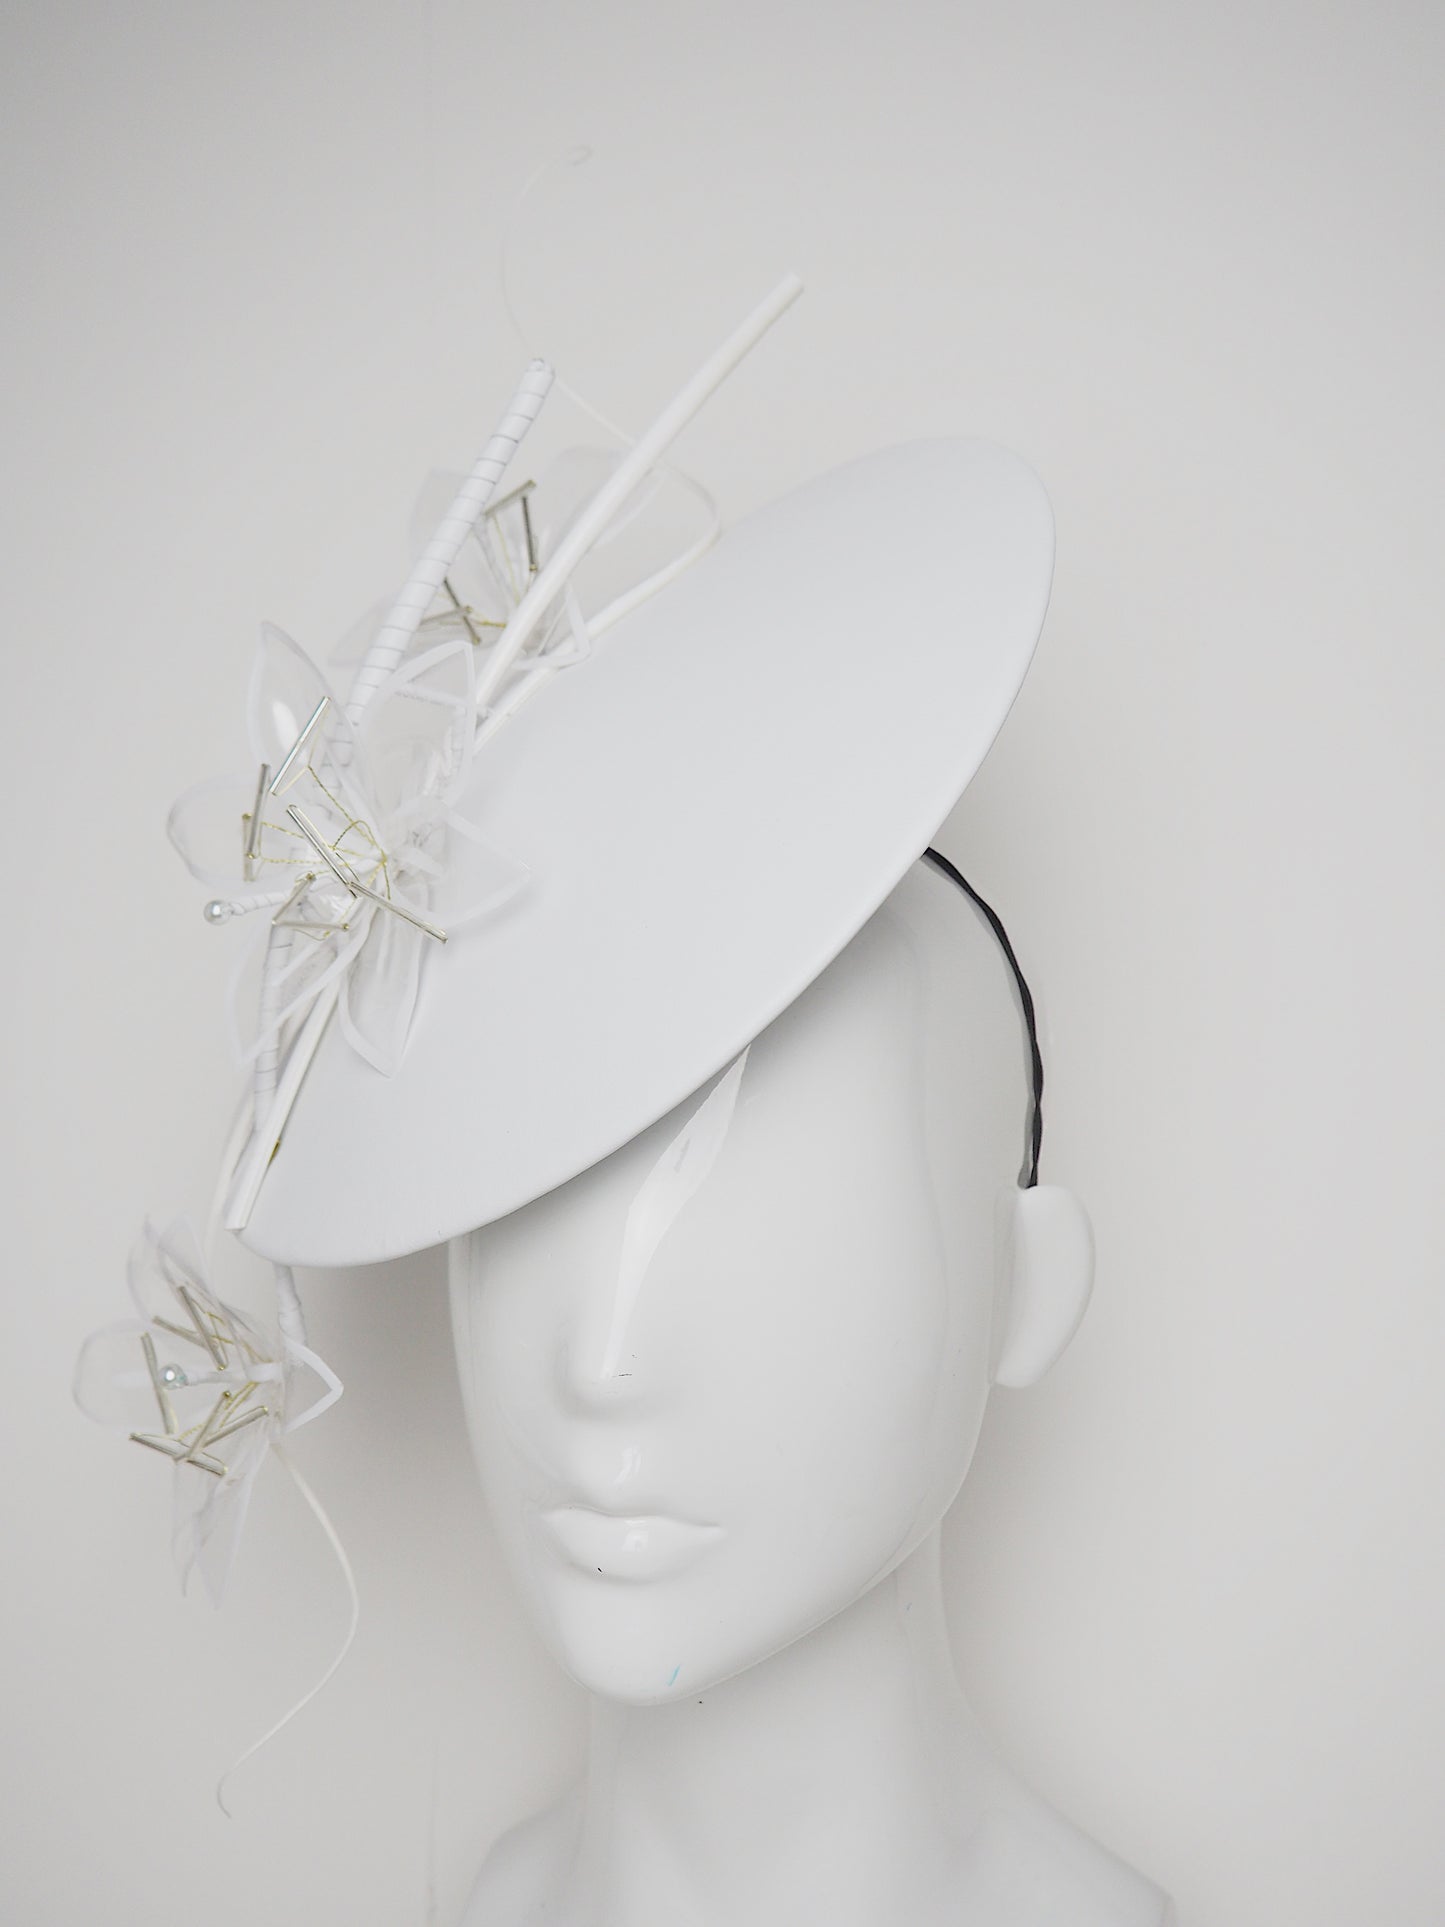 Lys En Blanc - White Crystoform Lillies on a floating leather disk with quill detail.